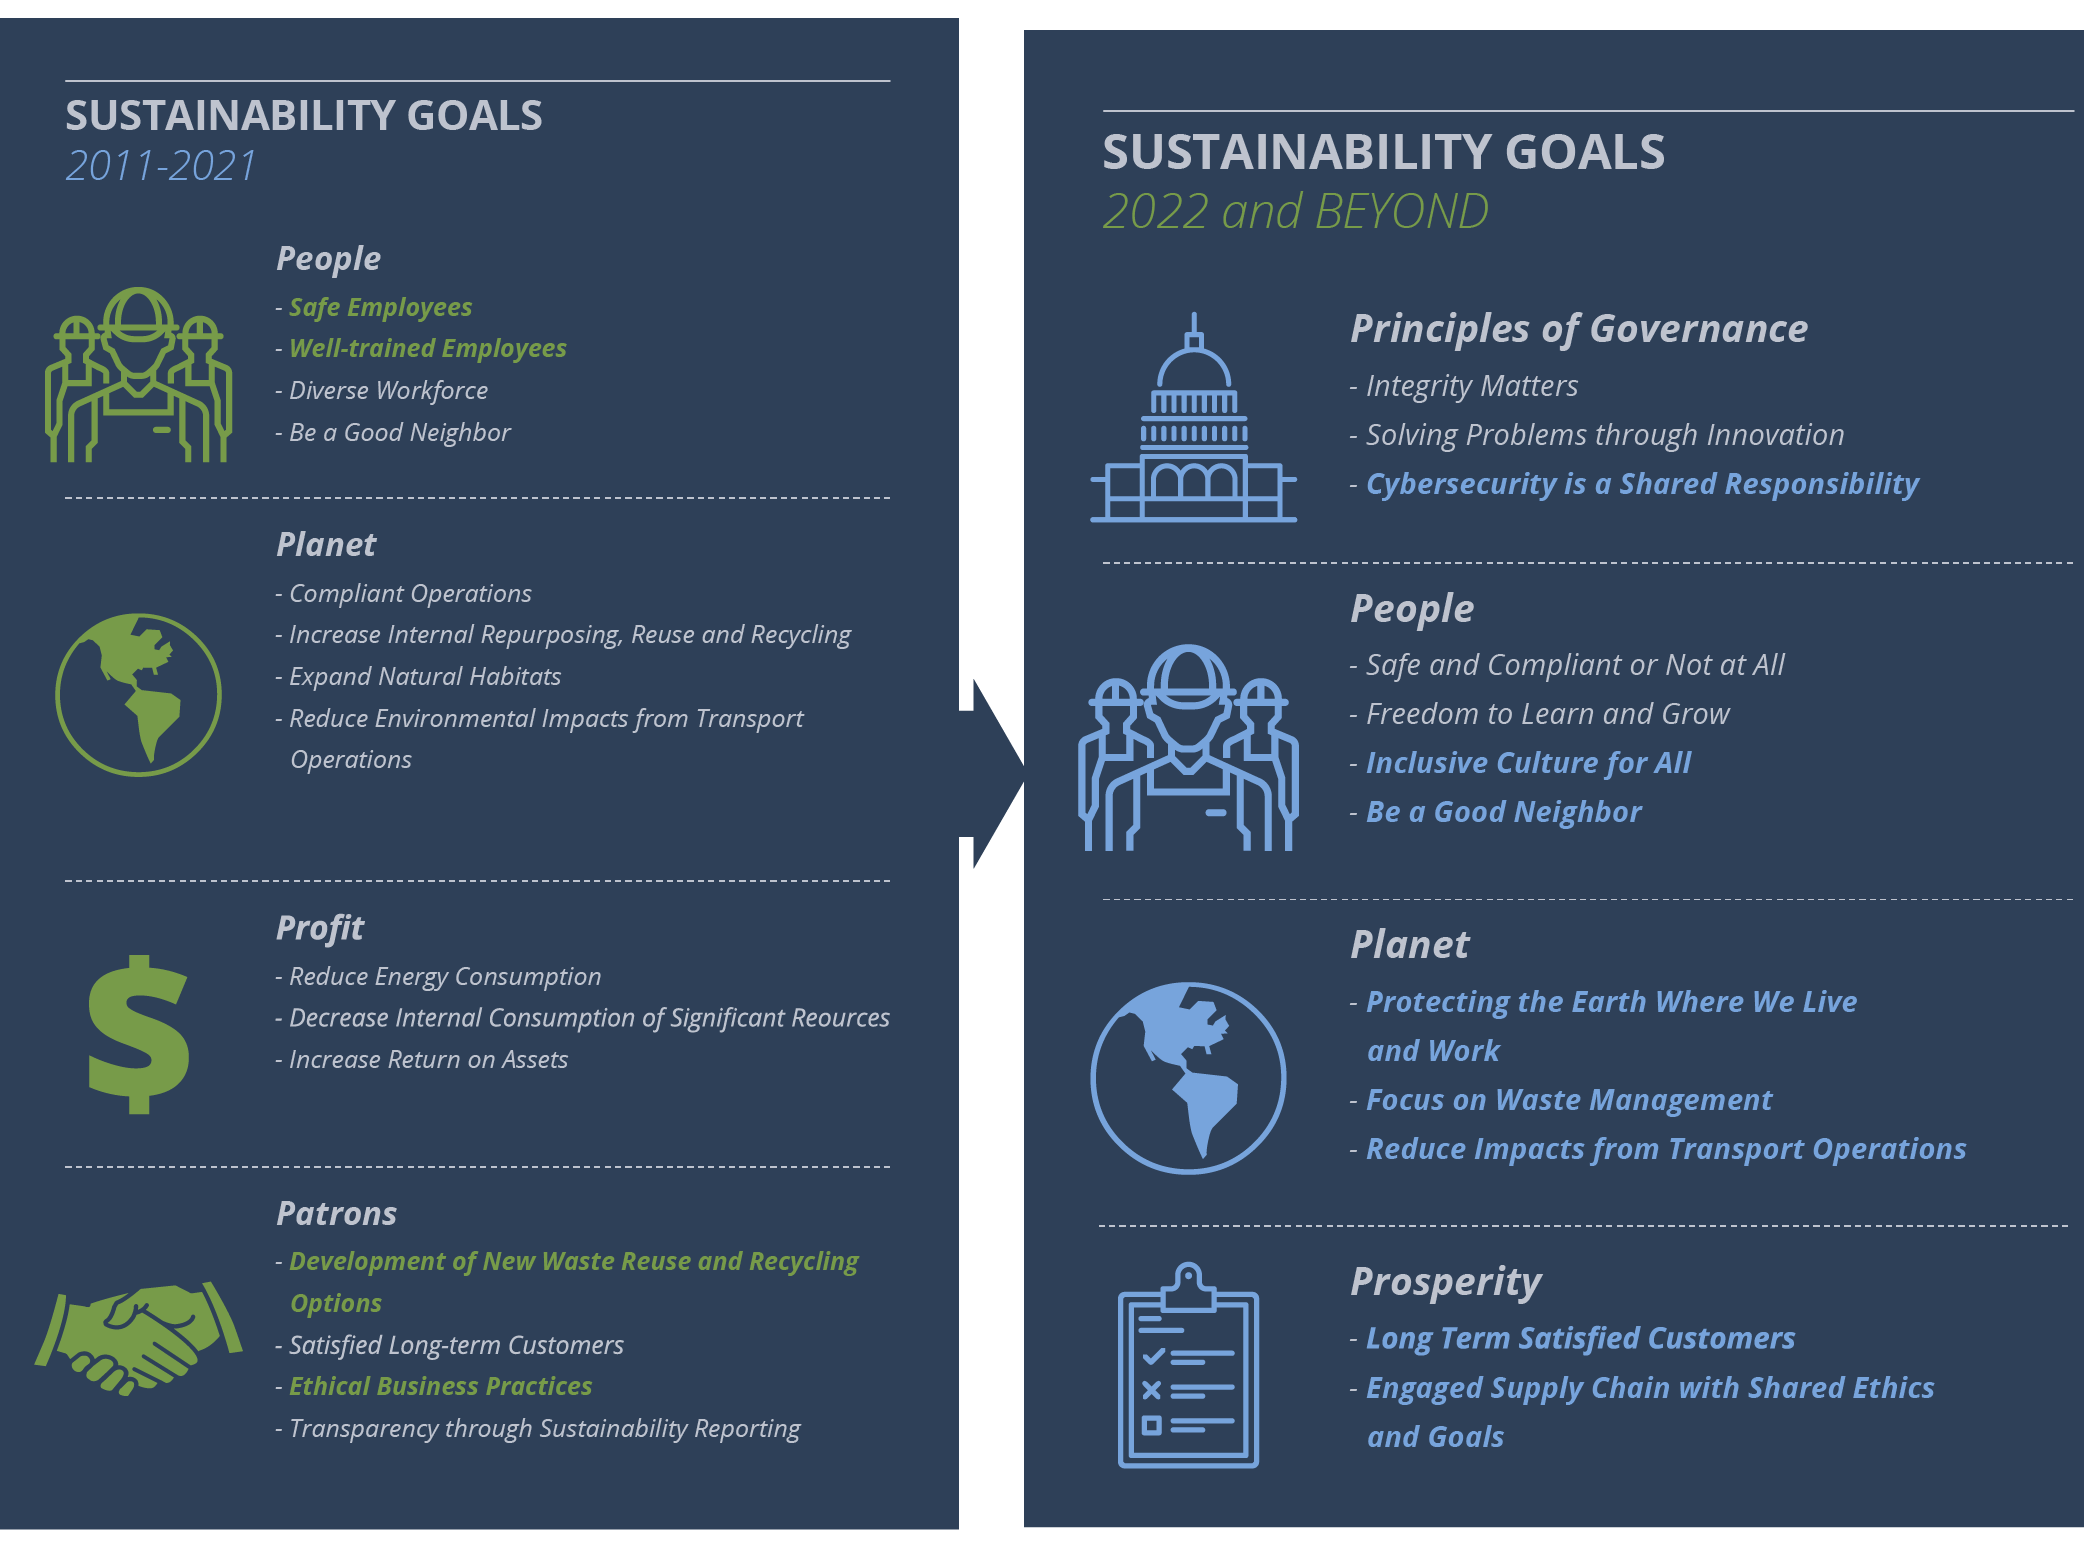 https://www.heritage-enviro.com/wp-content/uploads/2022/05/Sustainability-Goals-01.png